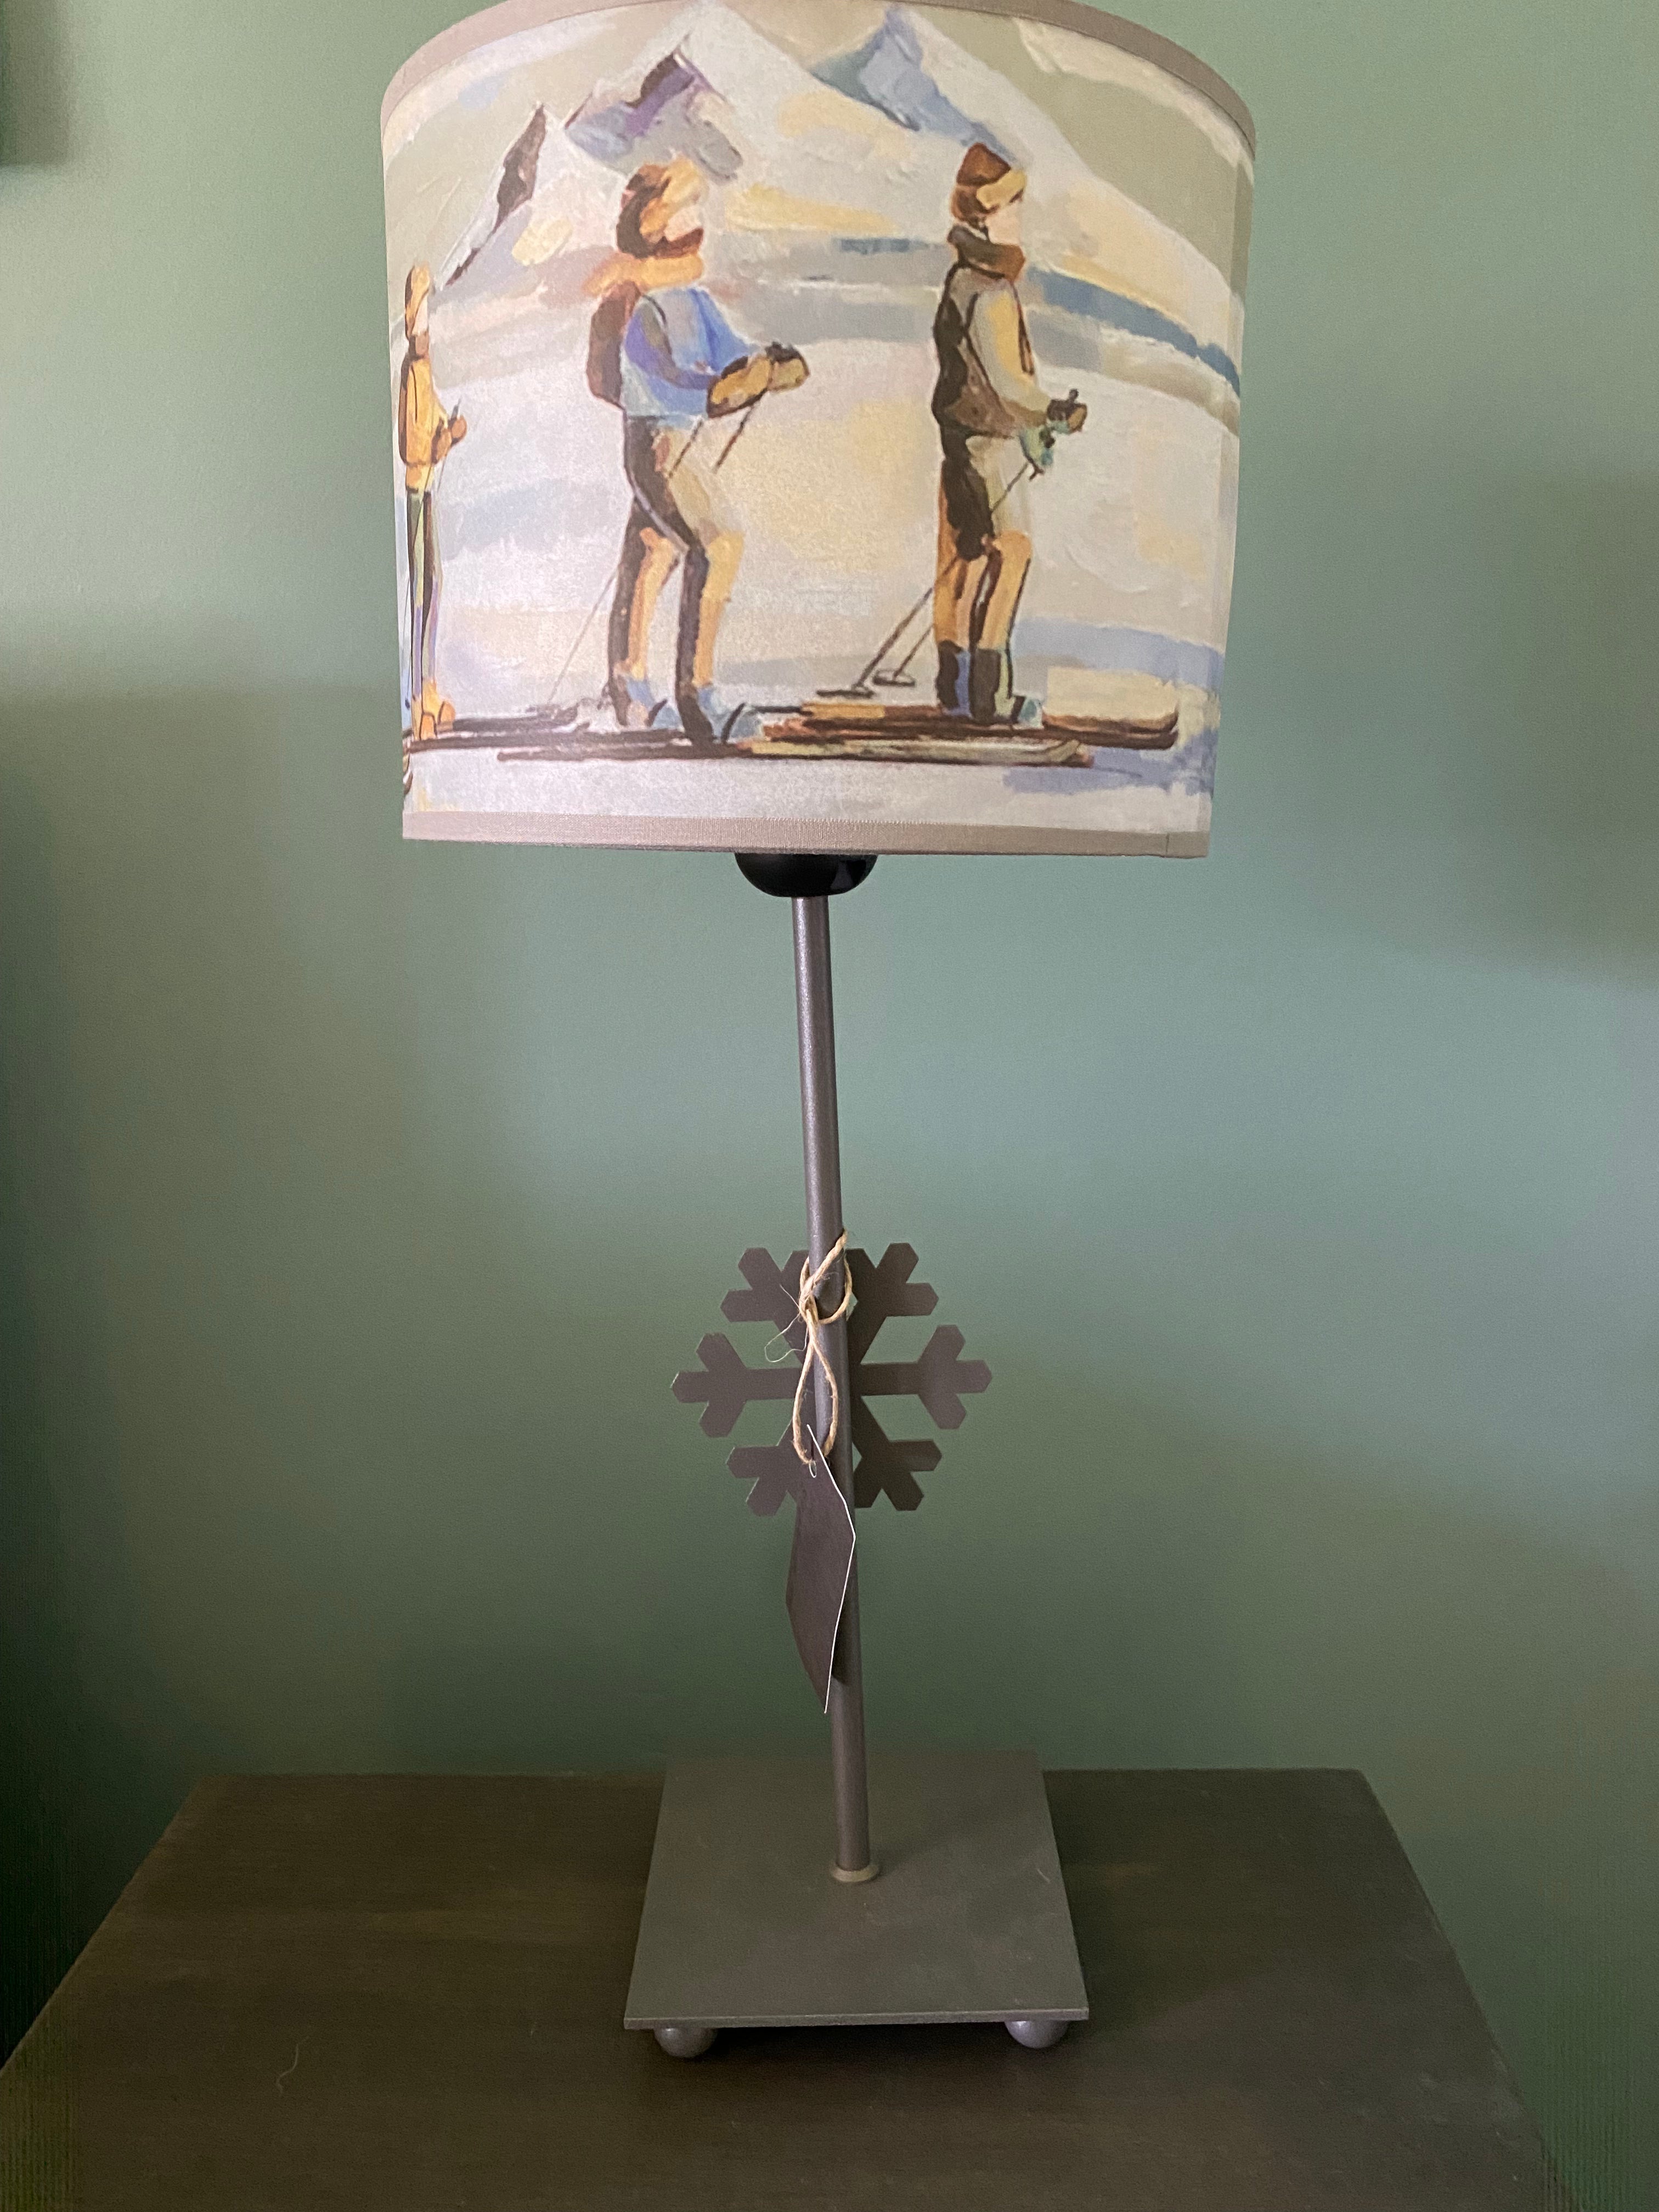 lamp with a square grey  solid metal base supporting a rod with ca snowflake mid way up the rod, topped by a colourful canvas lamp shade. The shade depicts people on skis skinning across the snow in a line, one in front of the other, with snow capped mountains in the background. Sitting on a  wooden table behind a green wall.